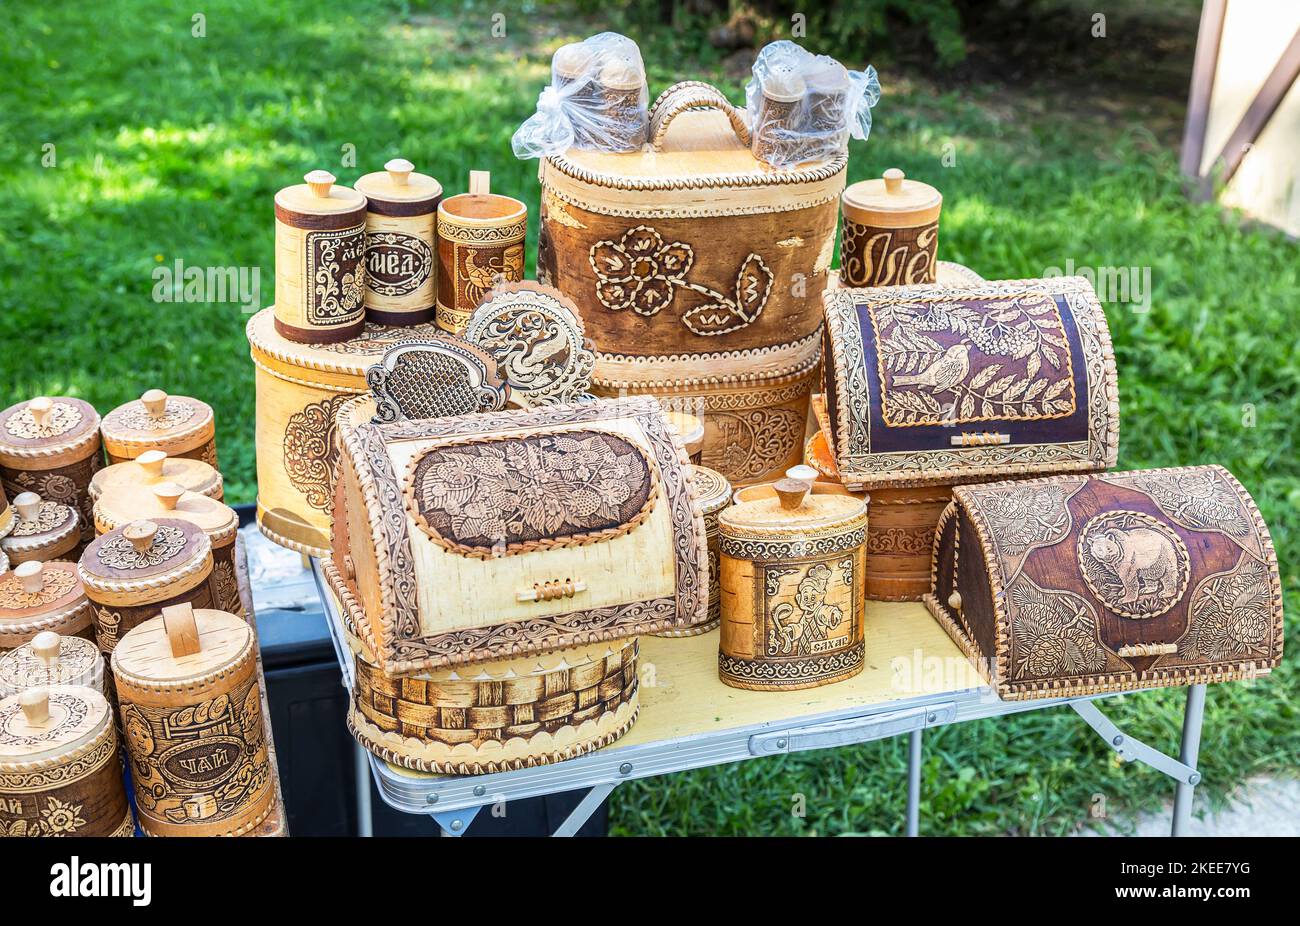 Velikiy Novgorod, Russia - August 27, 2022: Sale handmade products made of birch bark. Ecological dishes made of wood. Souvenirs Stock Photo